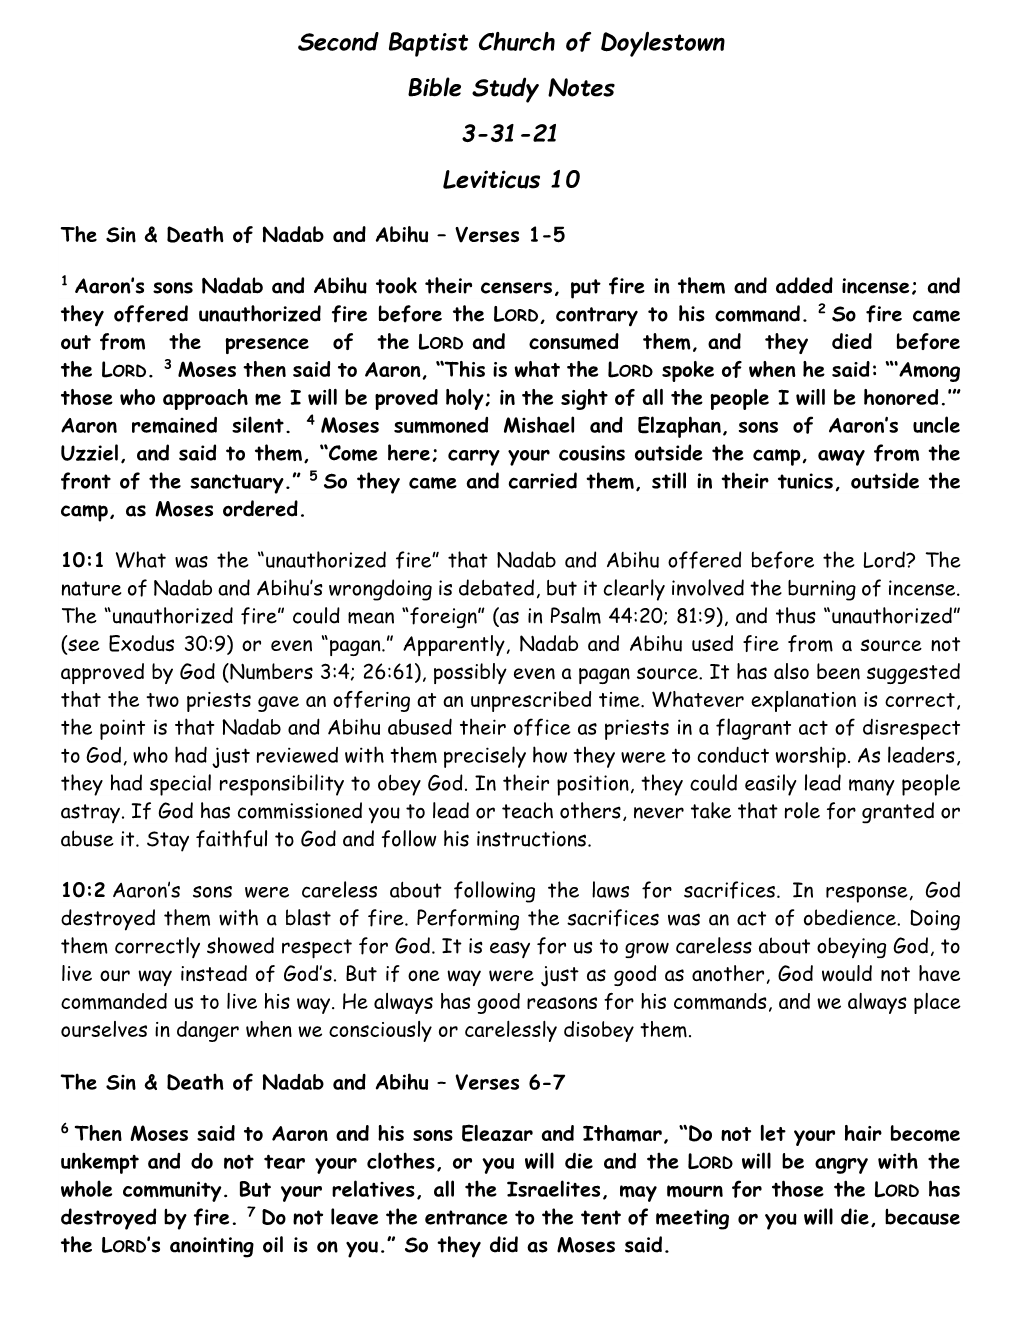 Second Baptist Church of Doylestown Bible Study Notes 3-31-21 Leviticus 10